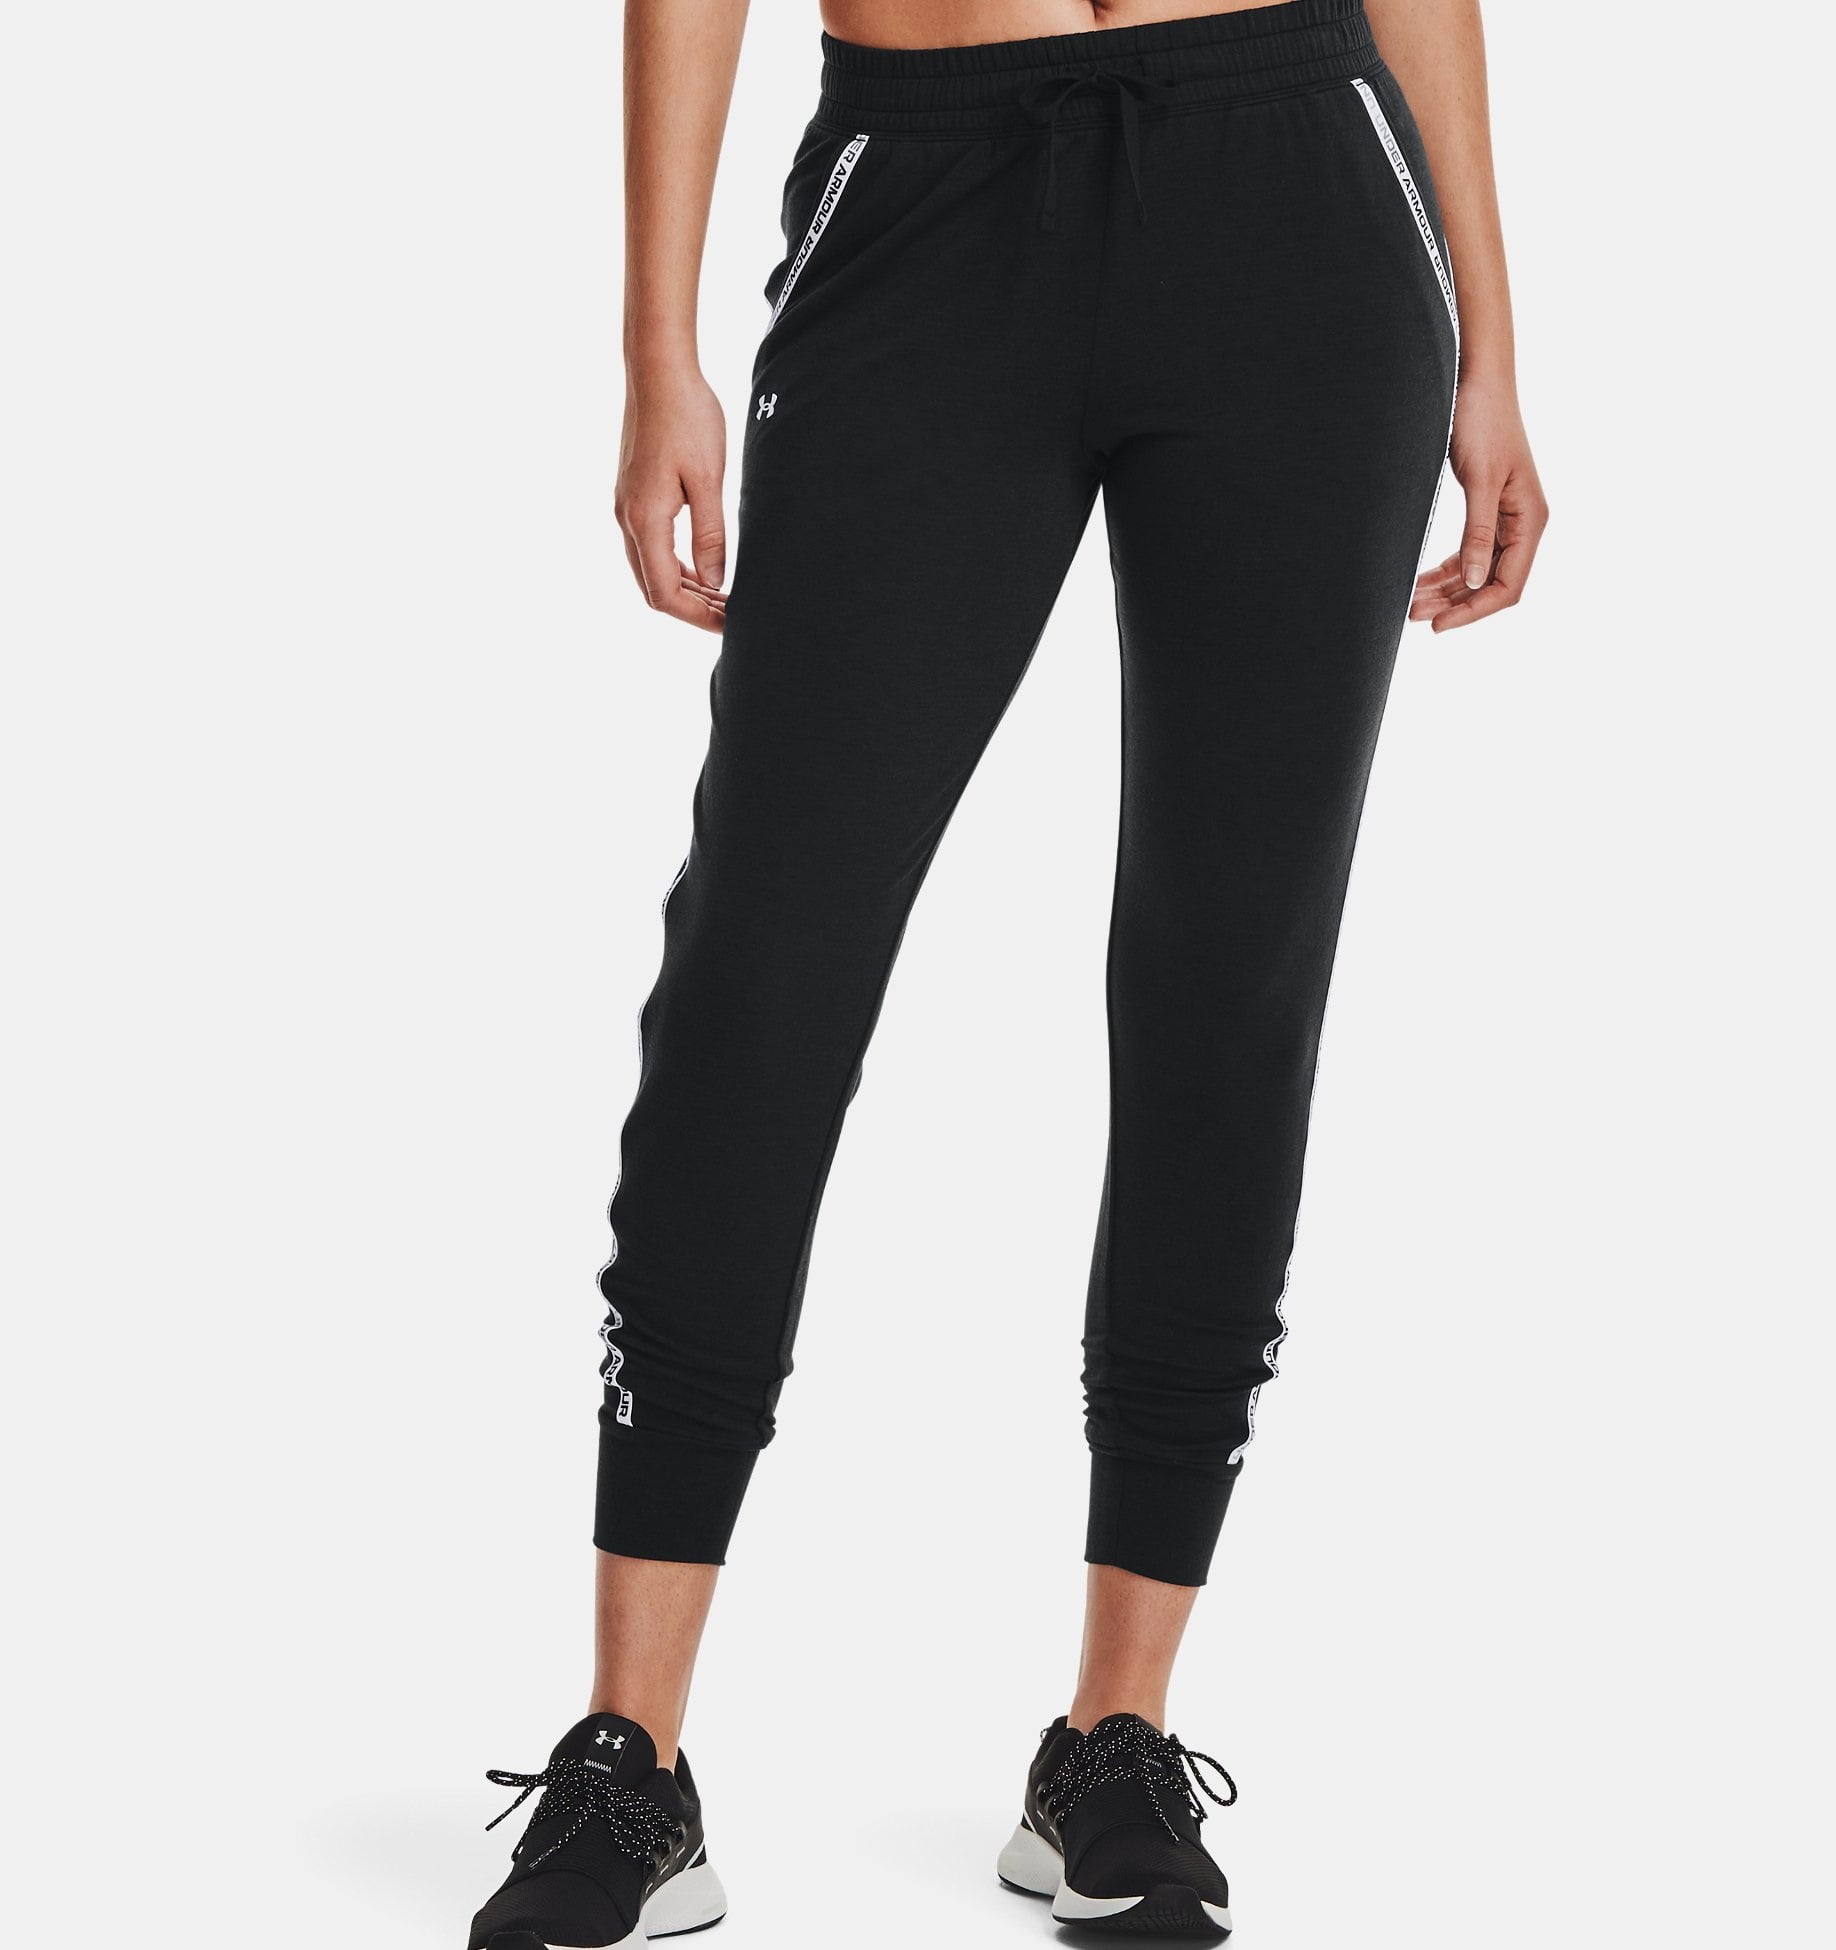 Under Armour Women's Rival Terry Taped Full Length Pants Black